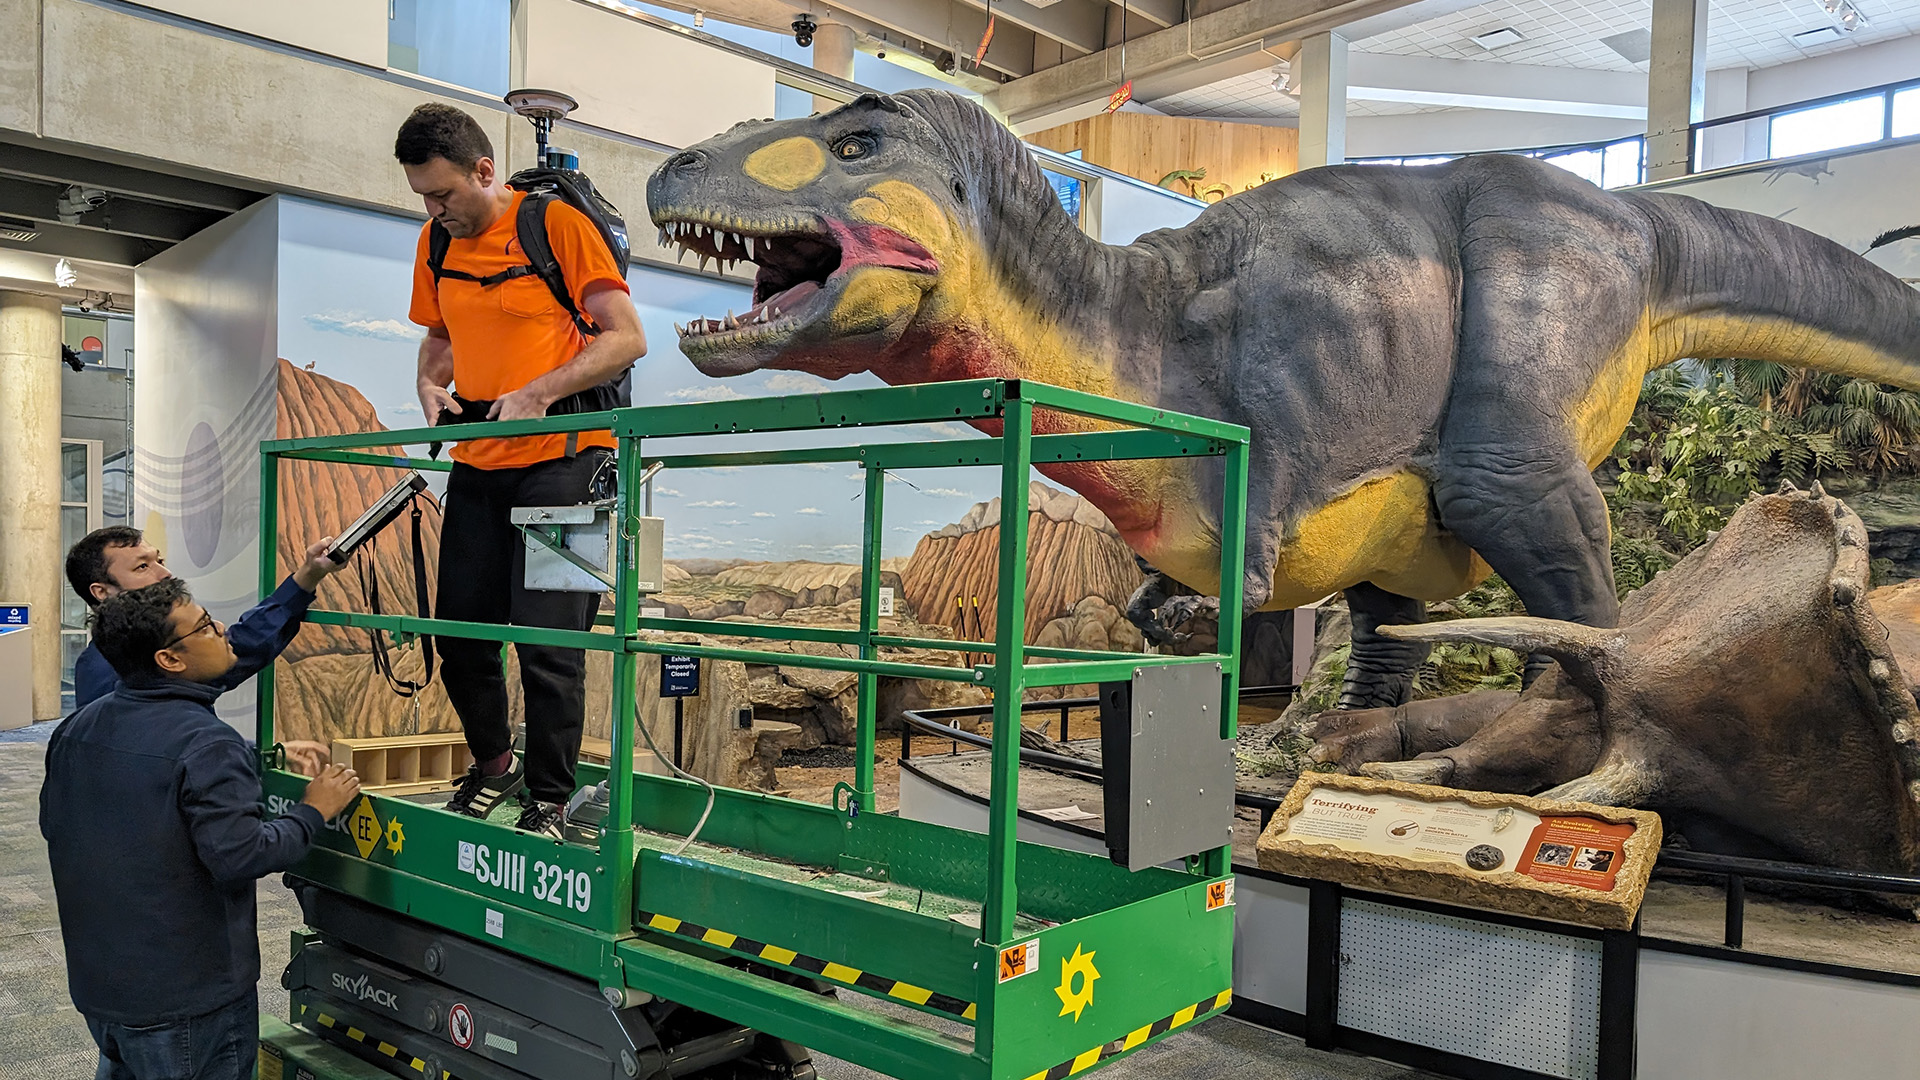 Cagri Gul, master's student in geographic information science, gets situated with the LiDAR backpack scanner before beginning to scan the repaired T. rex. Also pictured: Alifu Haireti, geospatial computing engineer with TGI, and Mustafizur Rahaman, master's student in geographic information science.